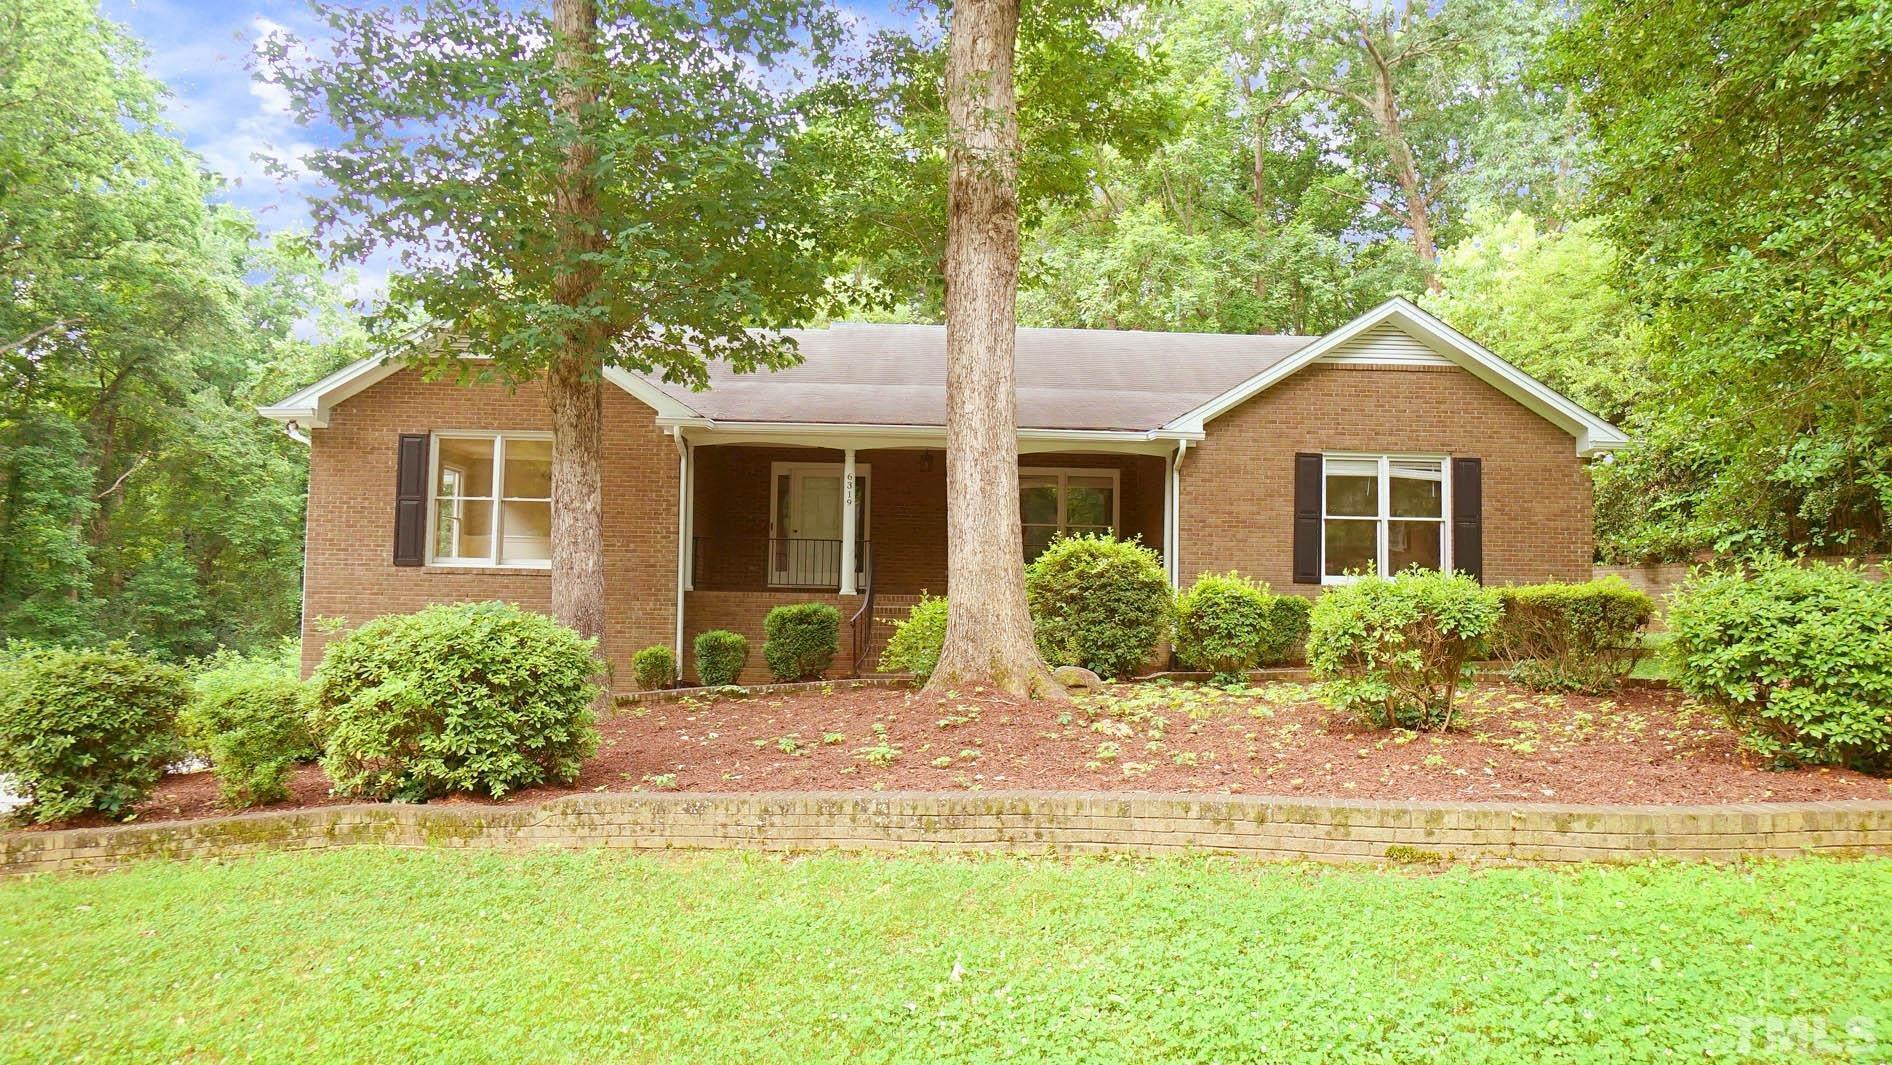 6319 Gainsborough Drive, 2516318, Raleigh, Detached,  sold, Realty World - Triangle Living